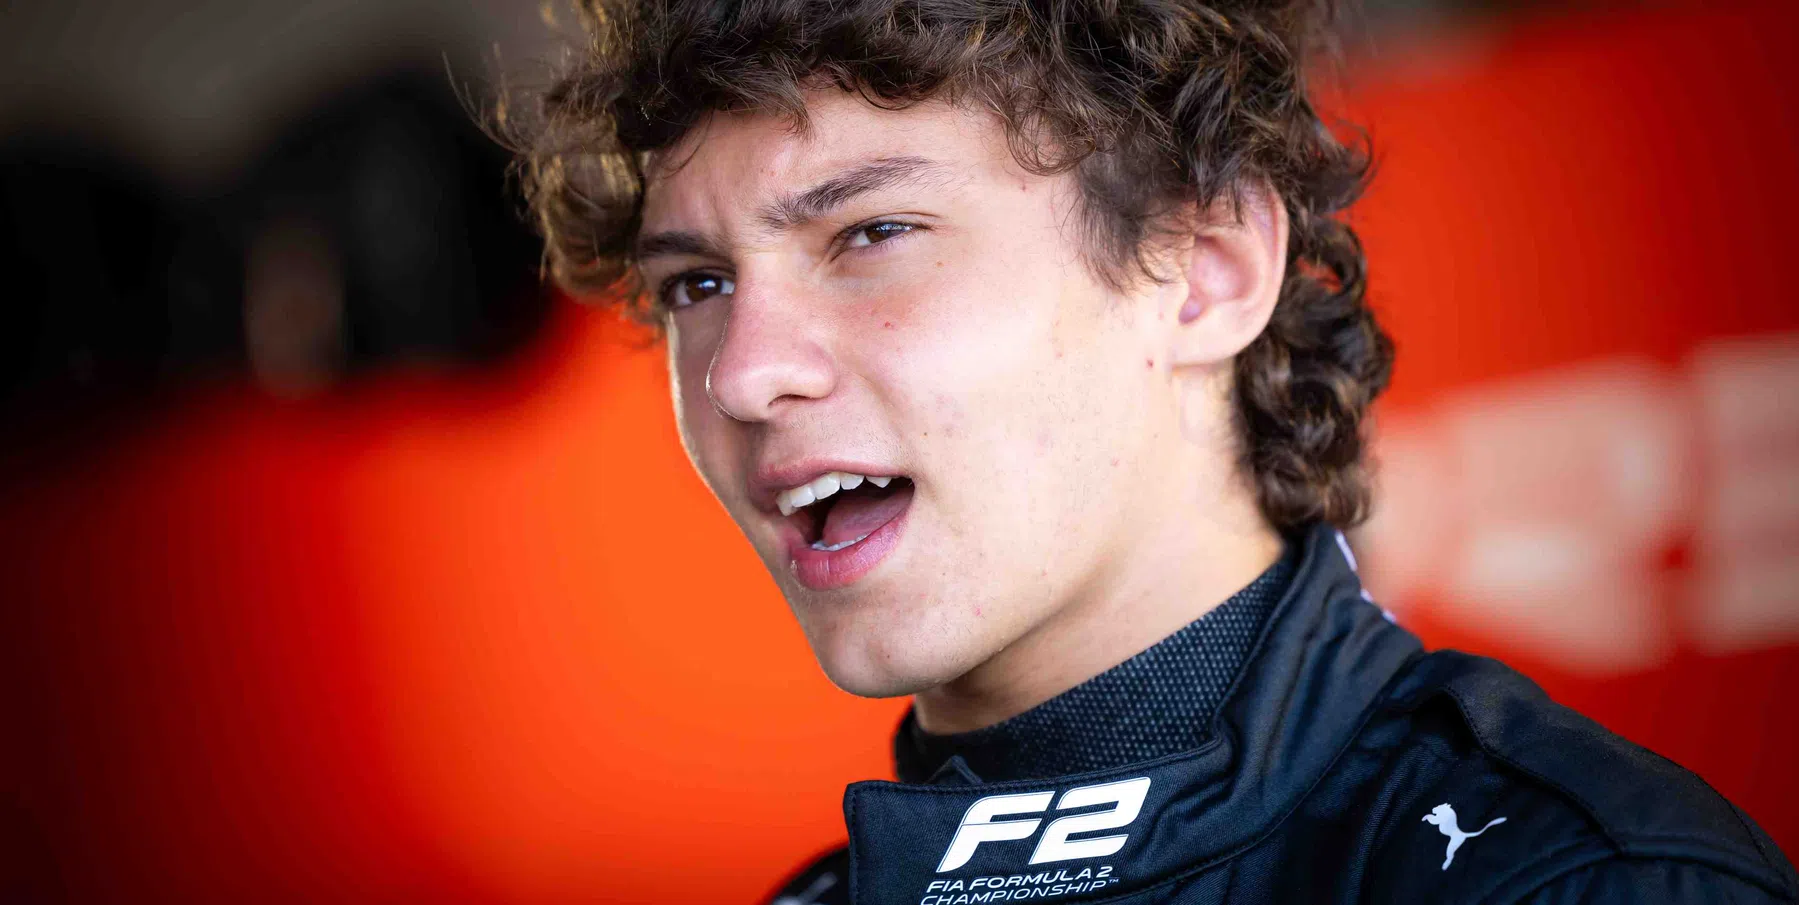 Mercedes wants Antonelli to make F1 debut at age 17